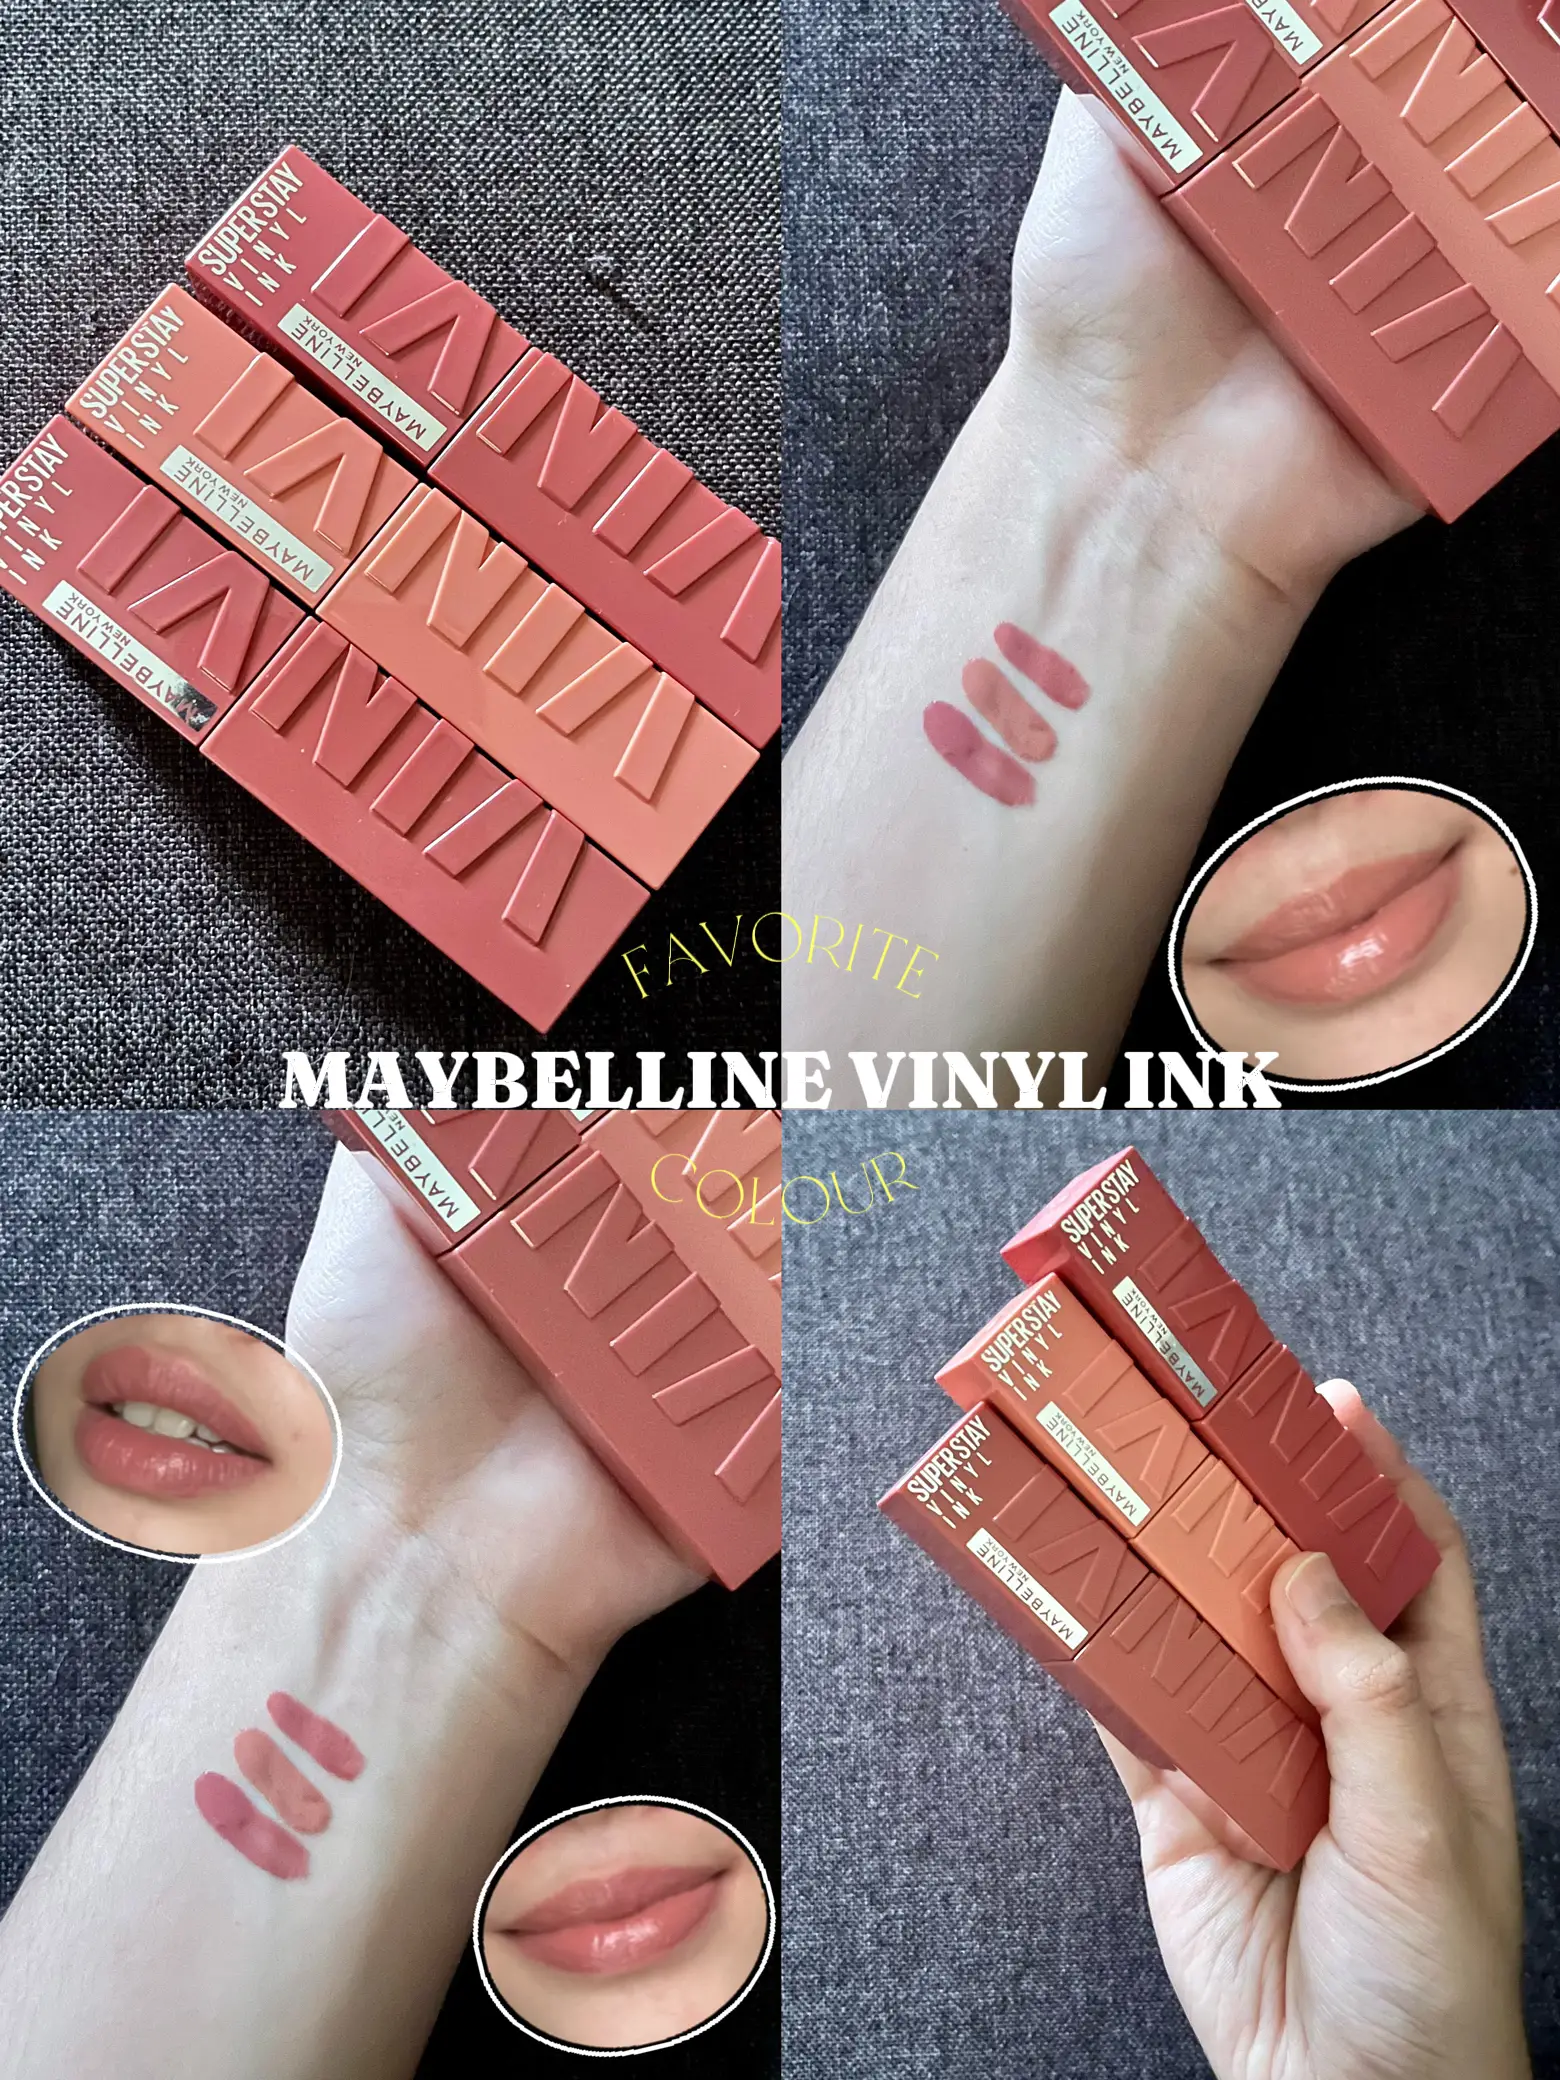 Maybelline Vinyl Ink Favorite Colour 💄, Gallery posted by Aida Z